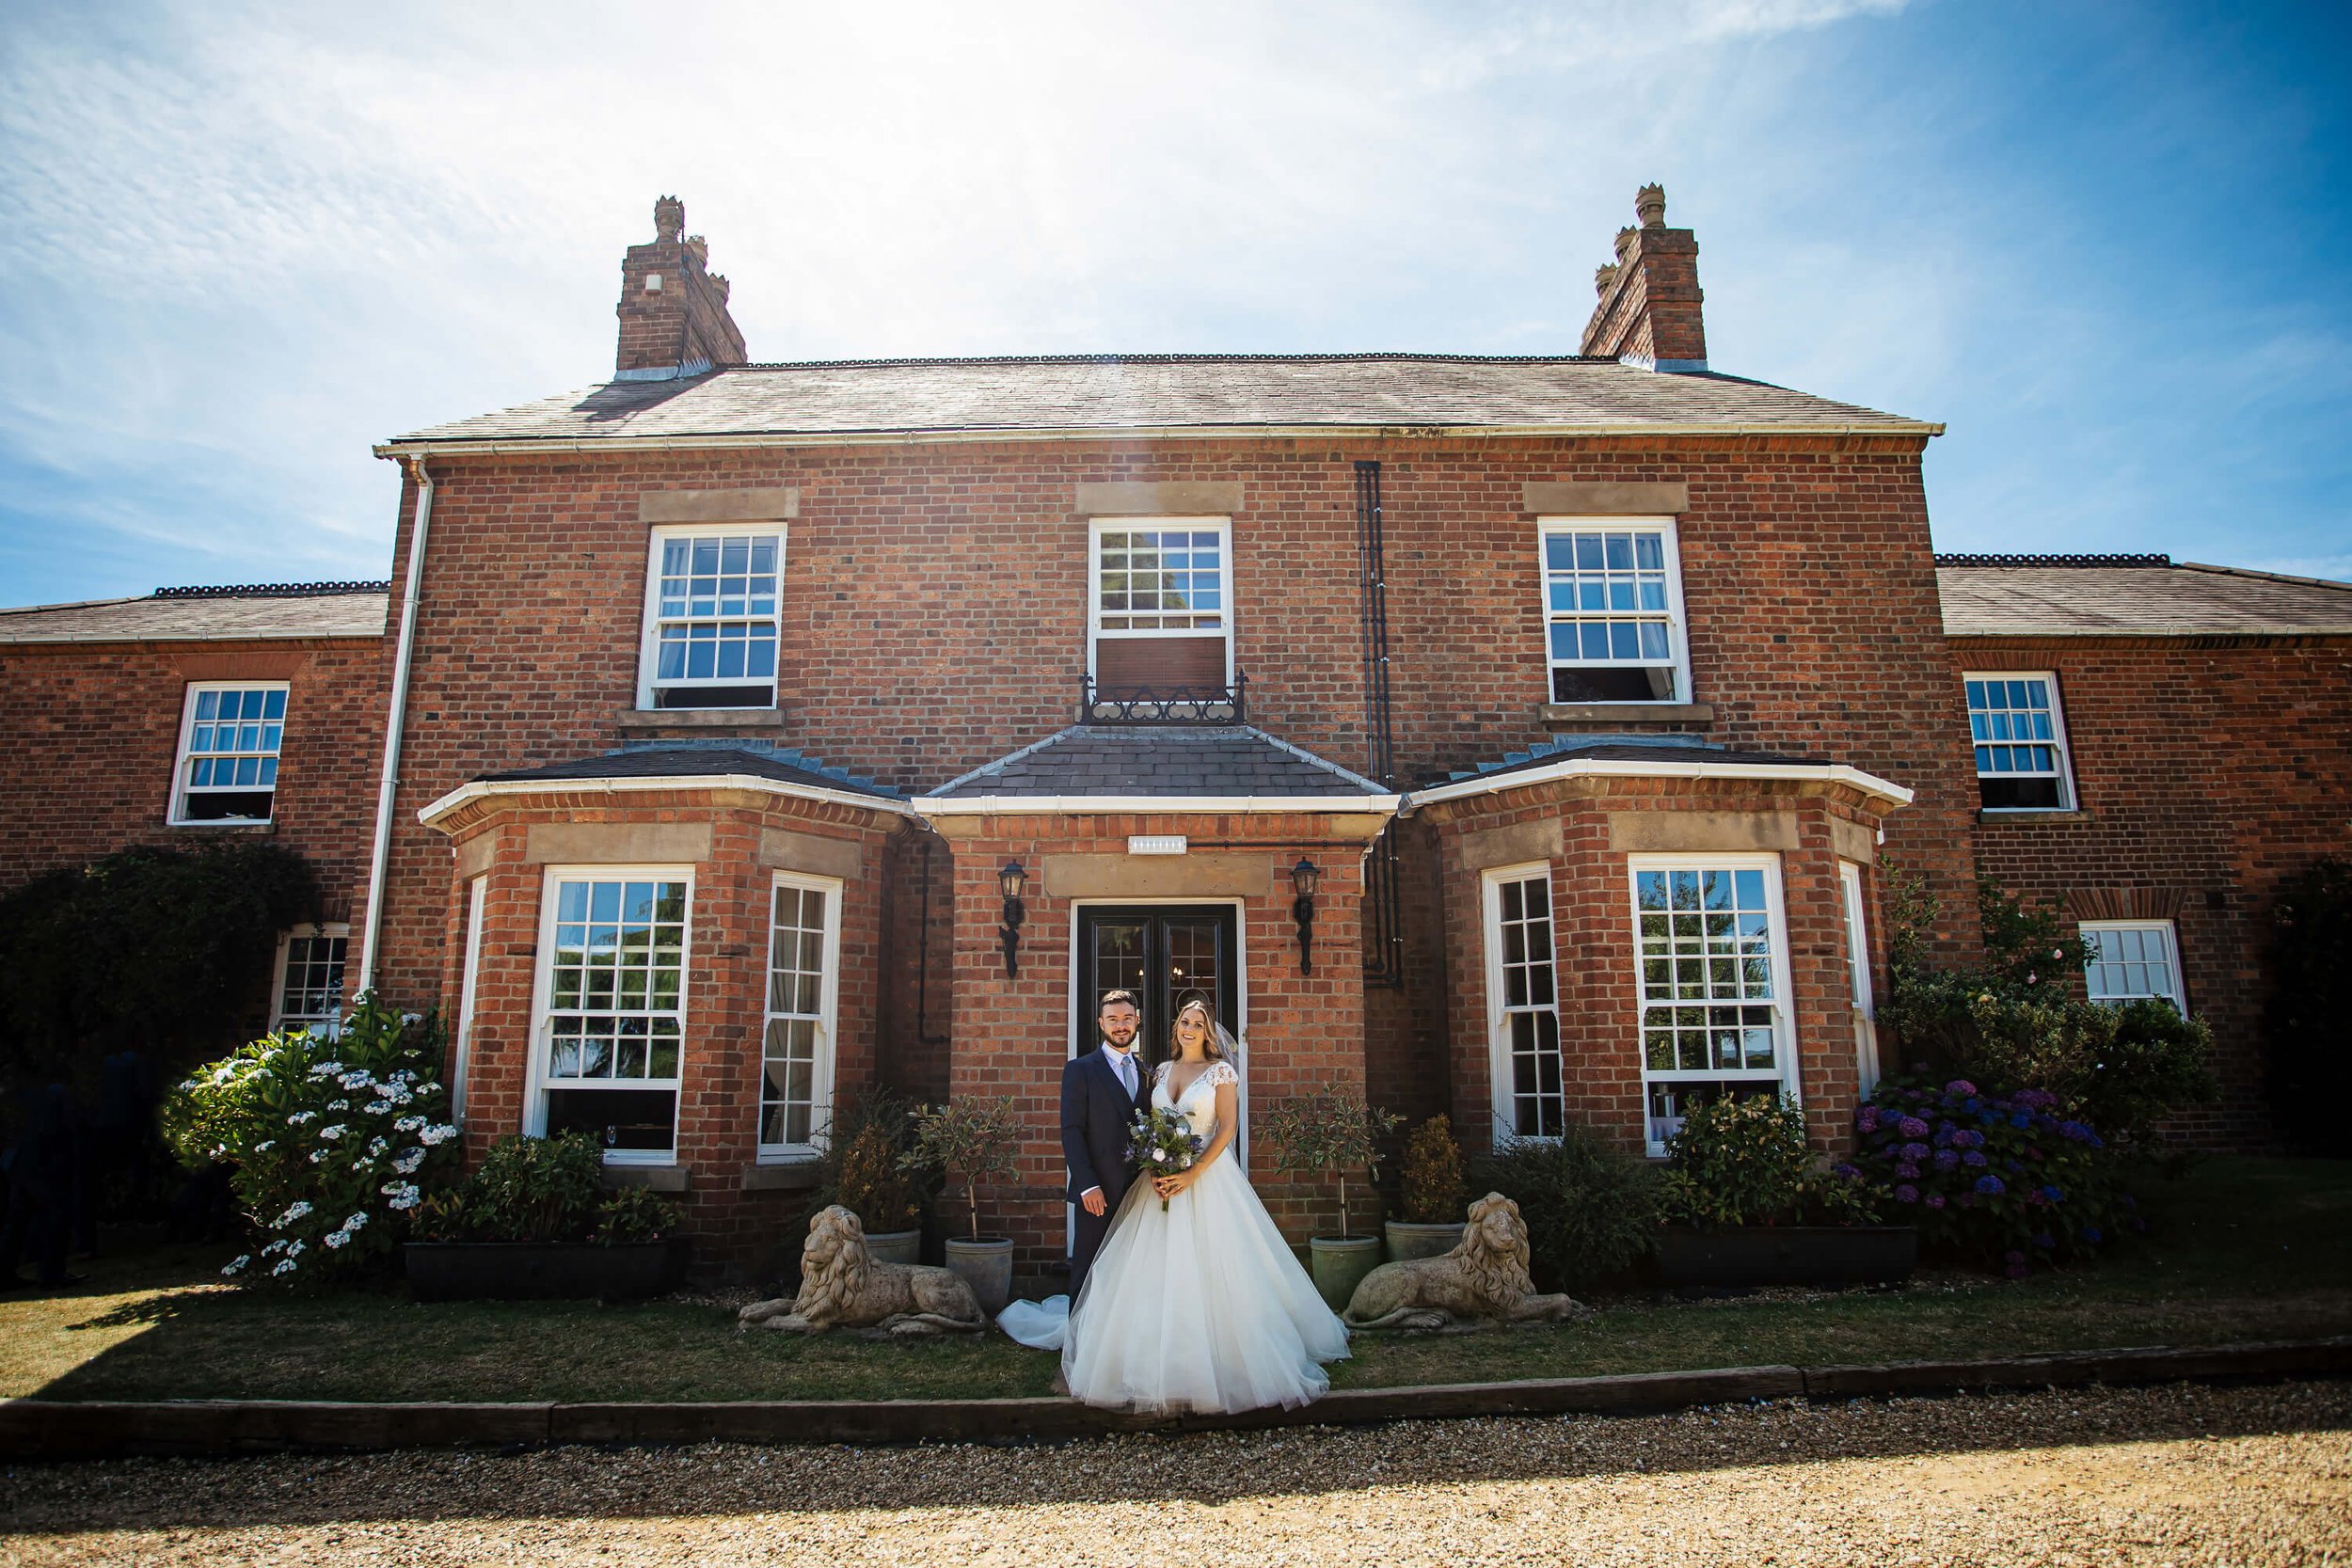 Bride and groom portrait in front of the farmhouse